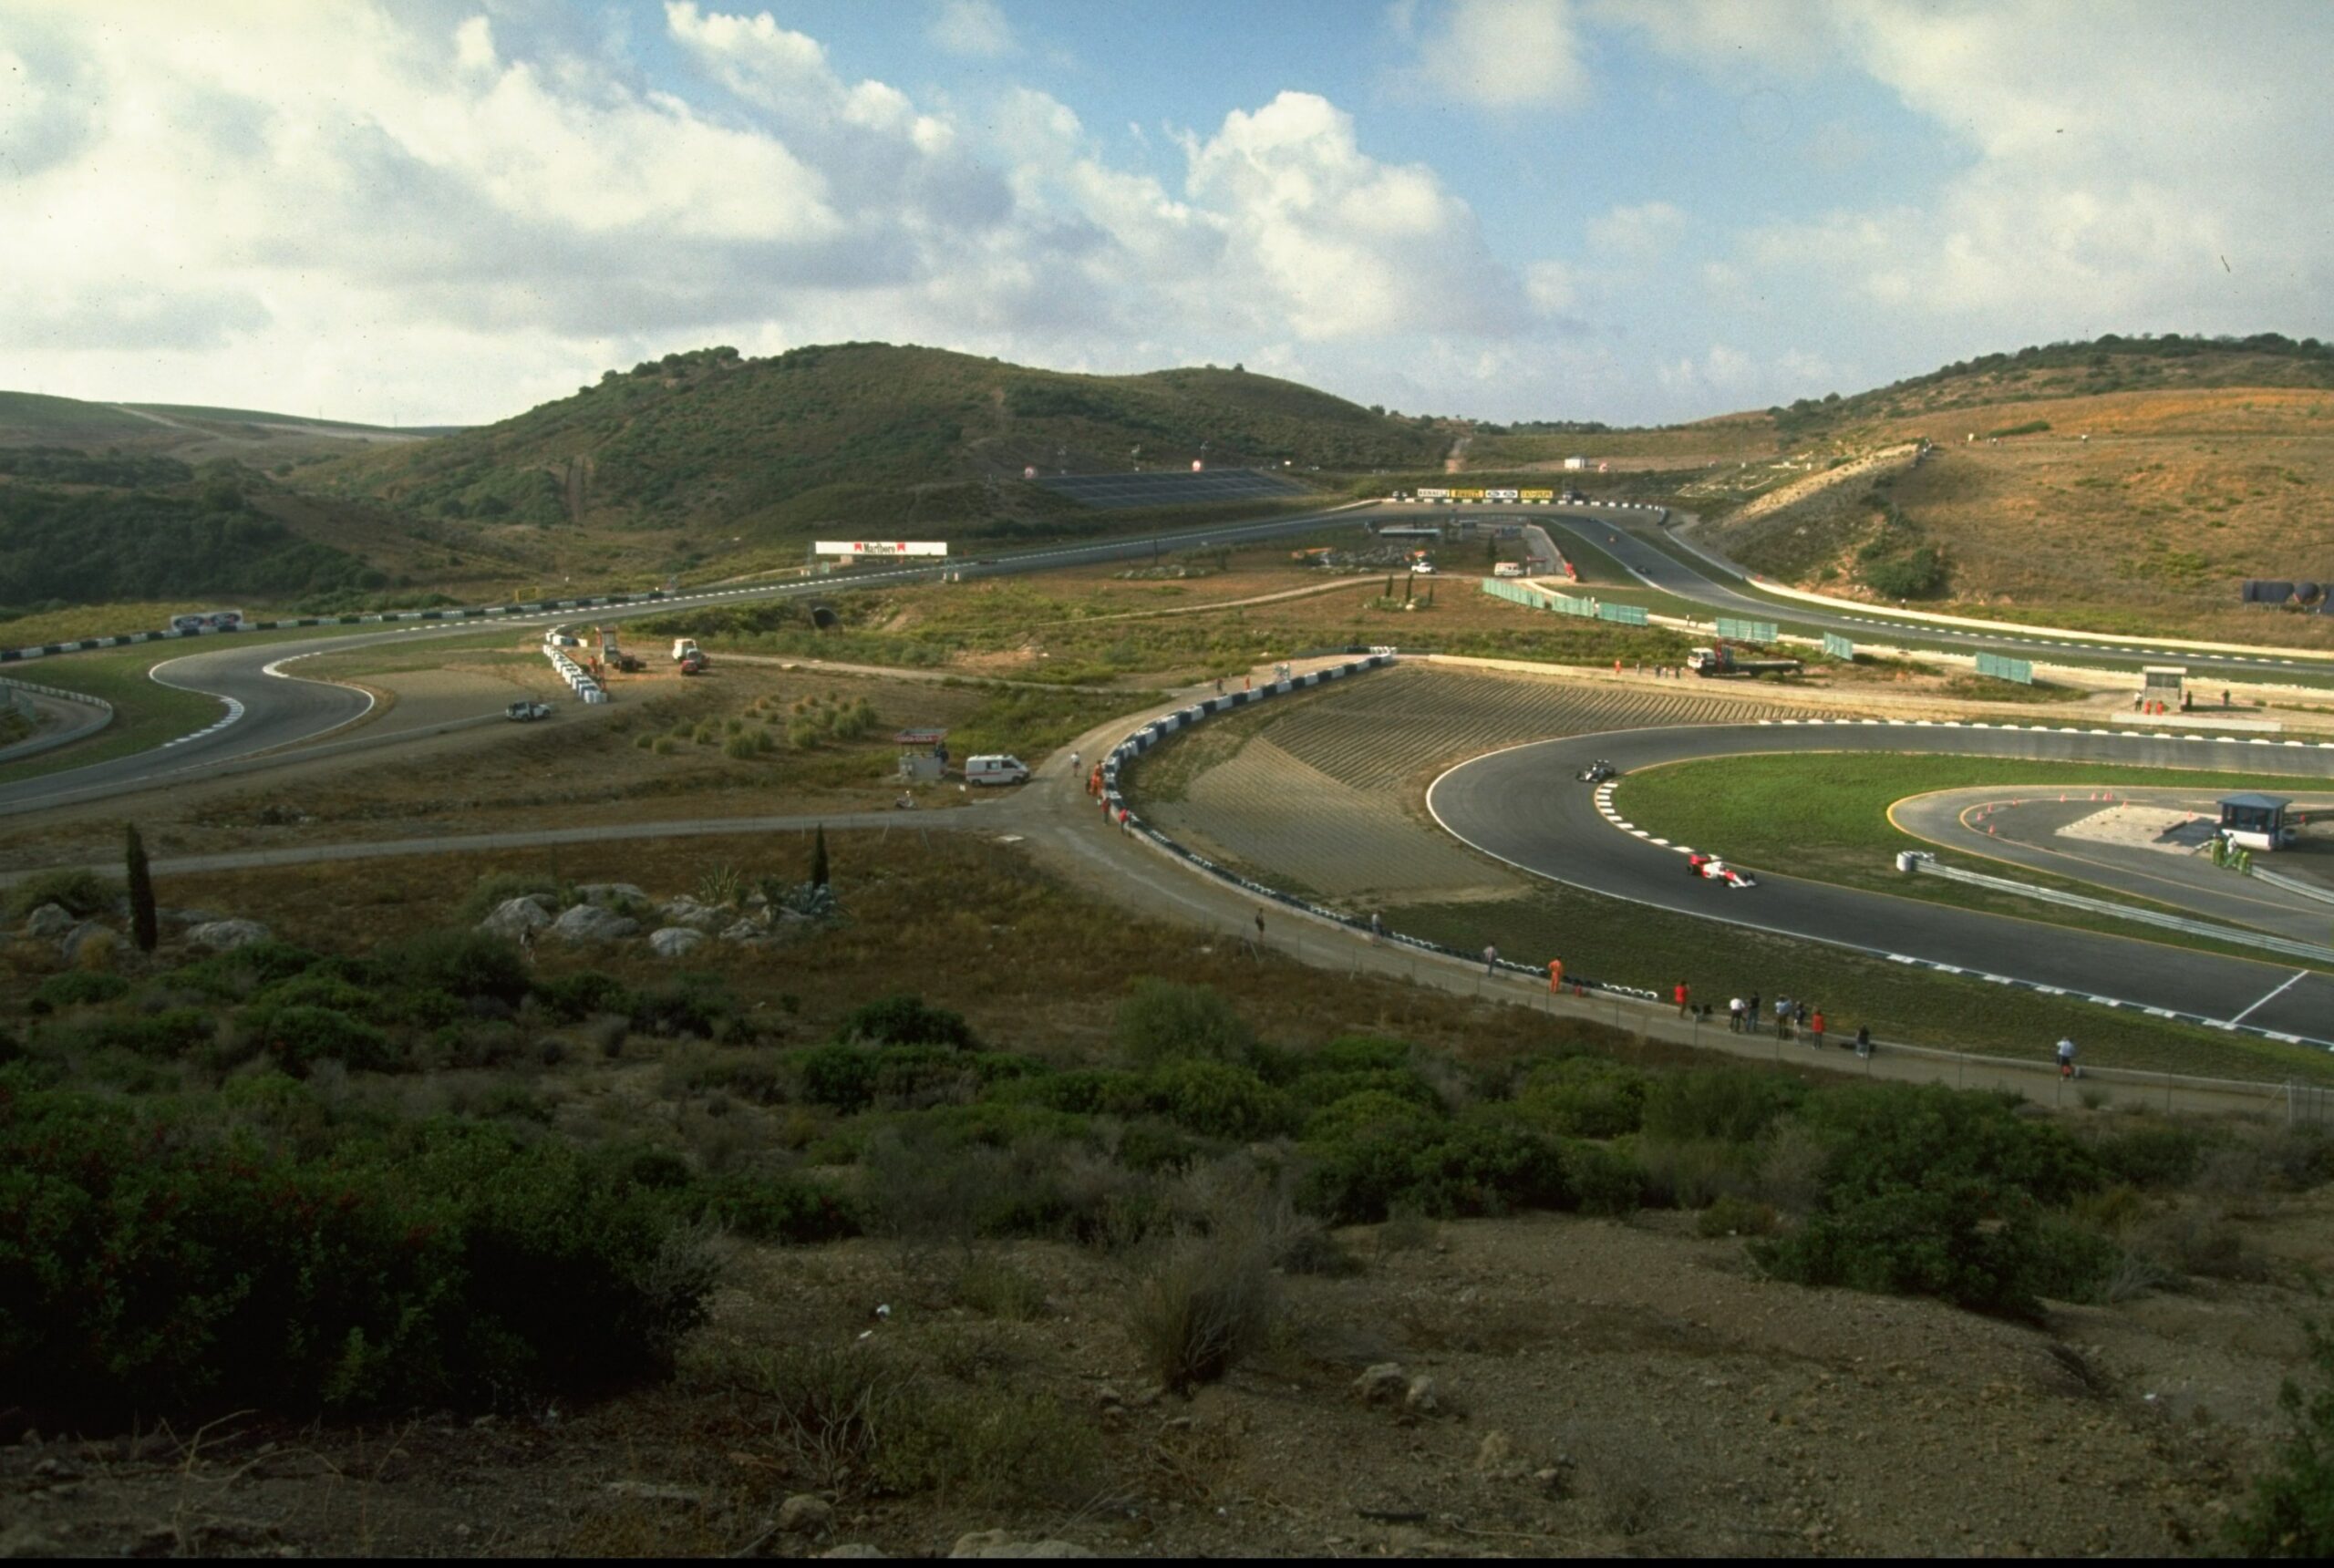 General view of the Jerez circuit